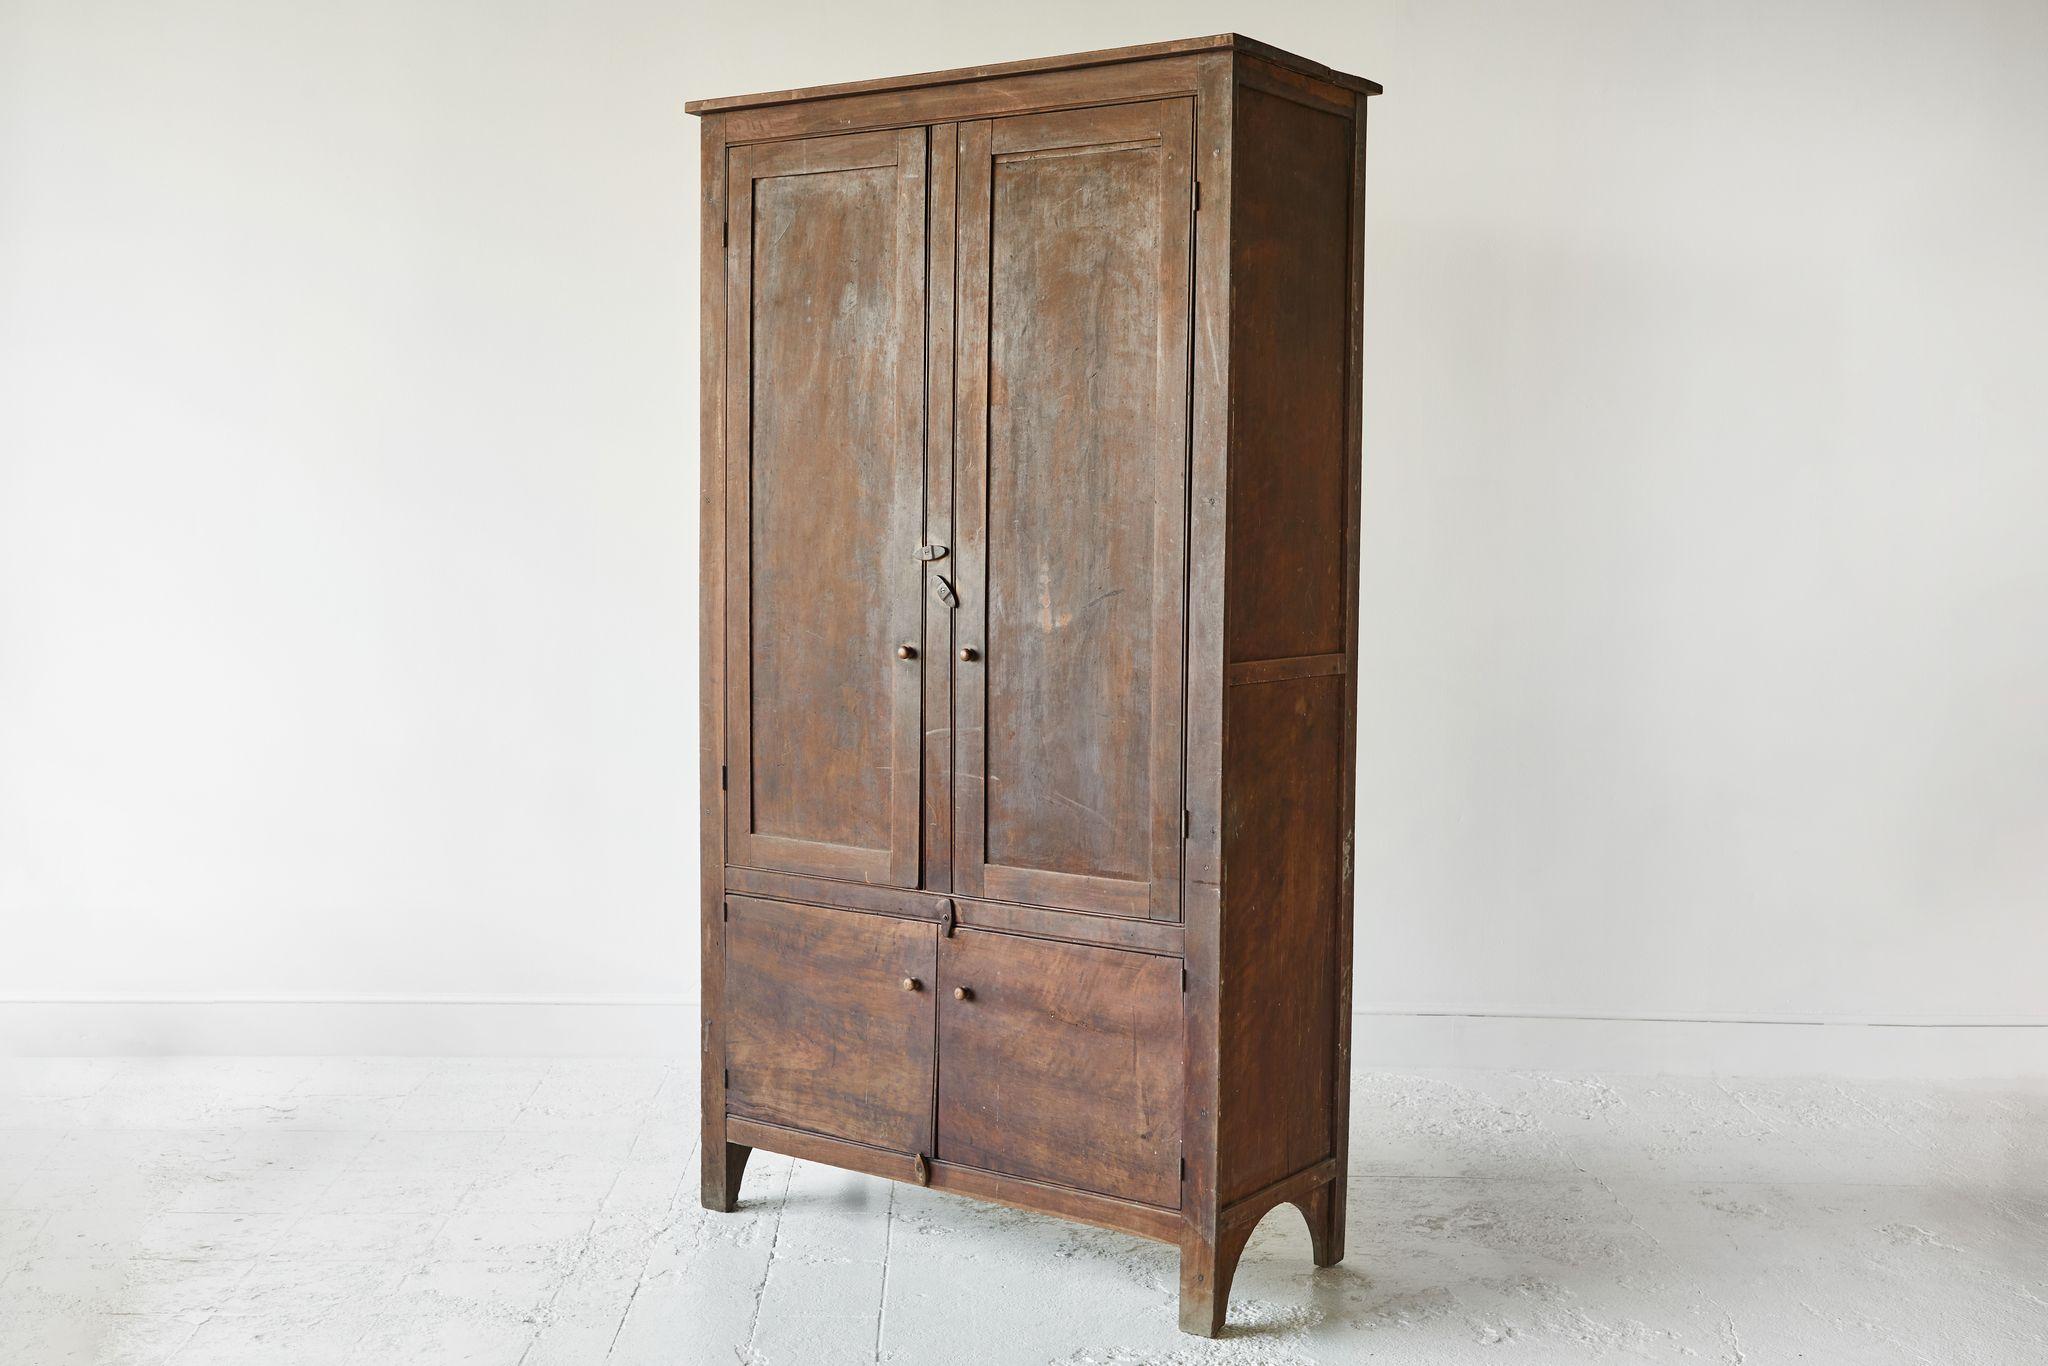 Early American rustic walnut wardrobe cabinet with four doors. The wardrobe offers original details and stain. The interior consists of one side with horizontal shelves and the side is open.